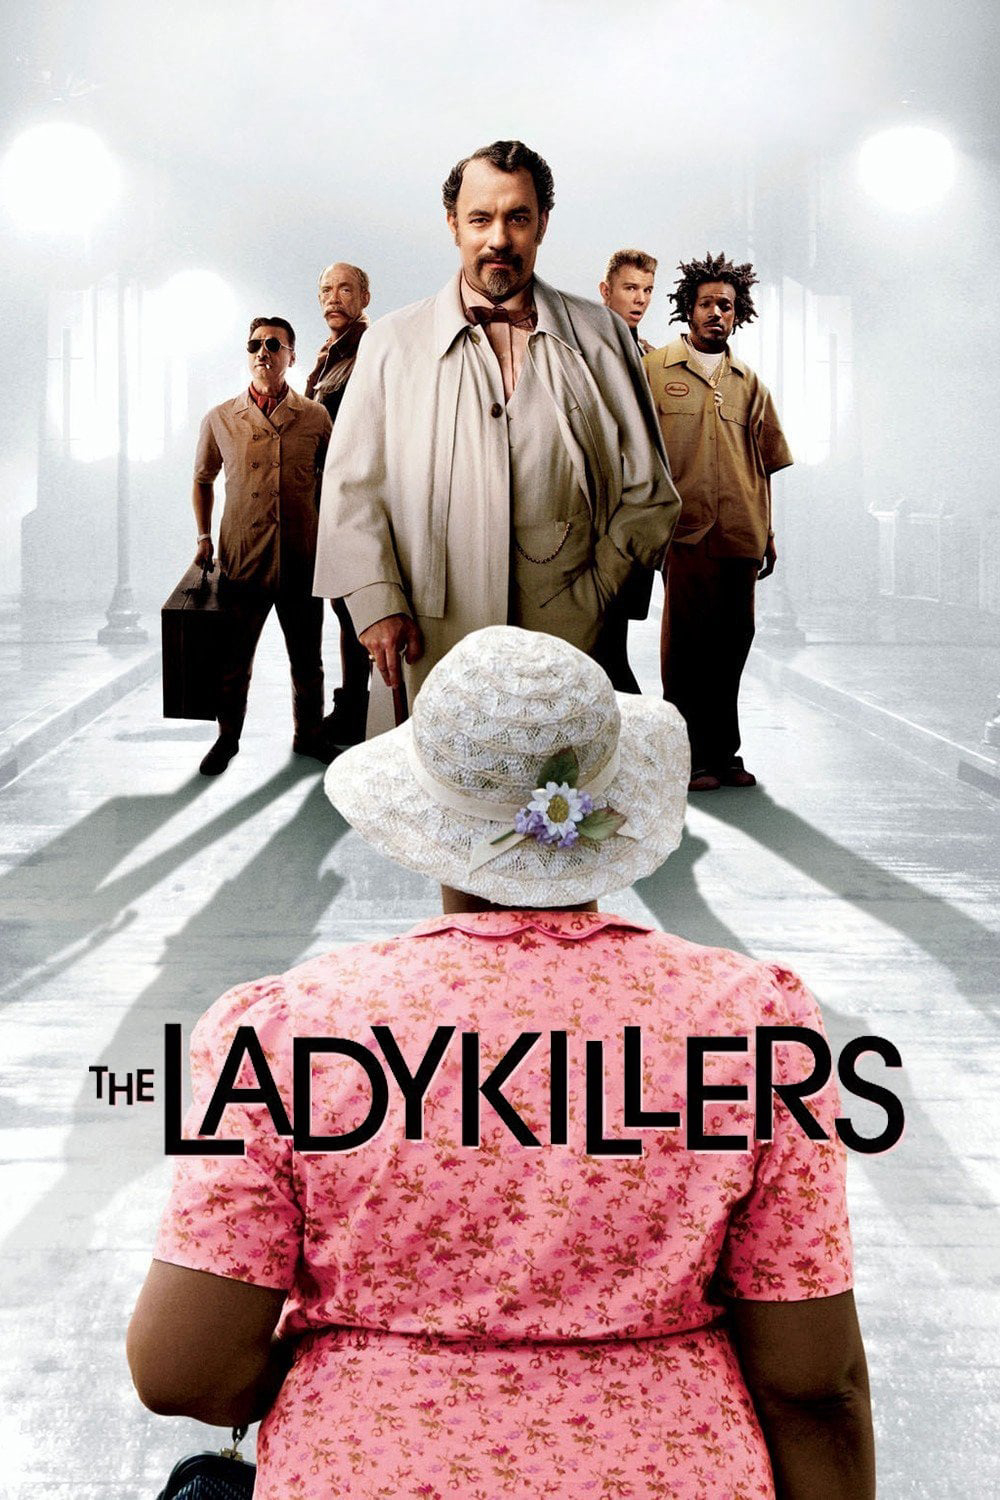 The Ladykillers - The Ladykillers